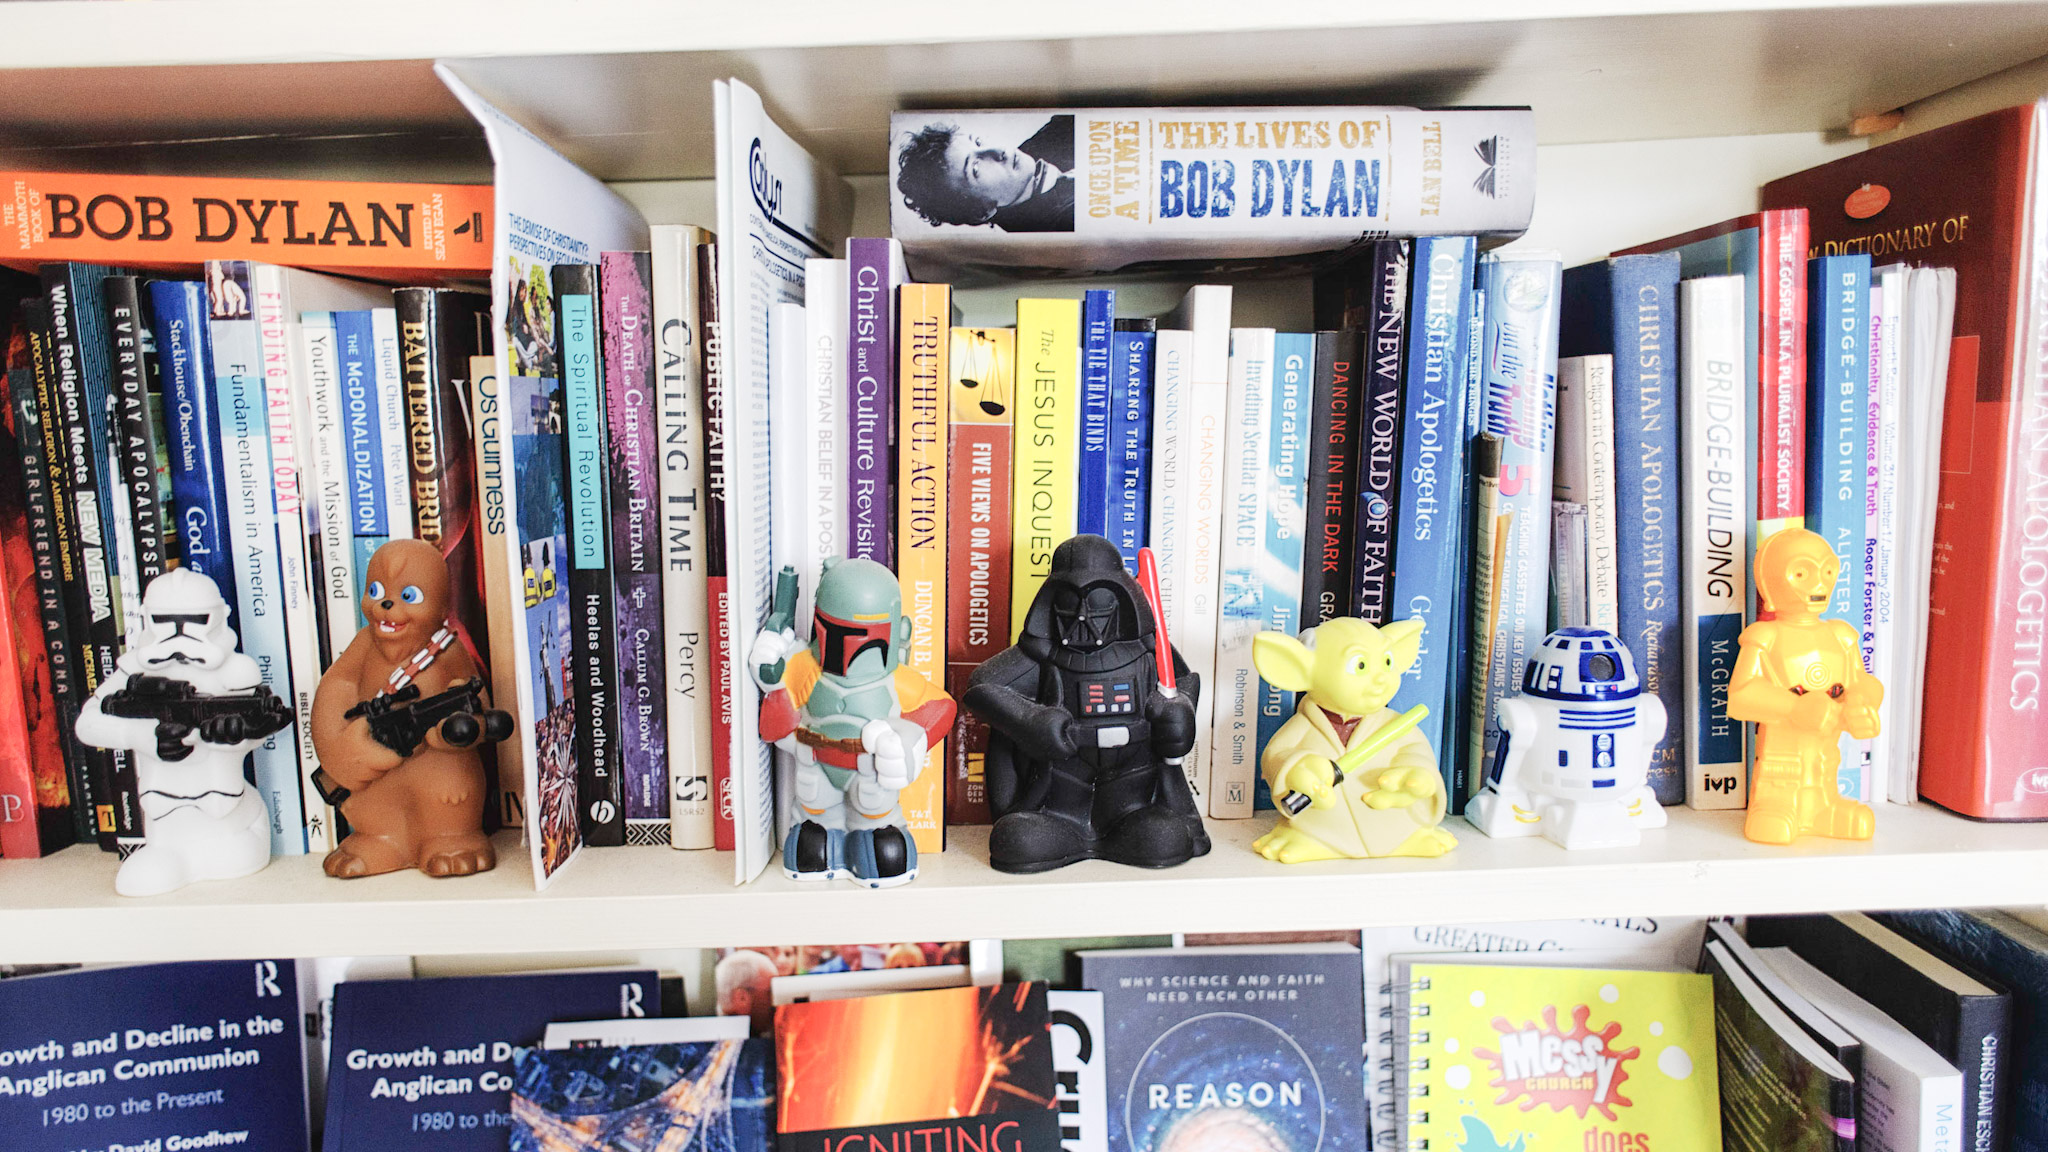 A shelf covered in books and figurines